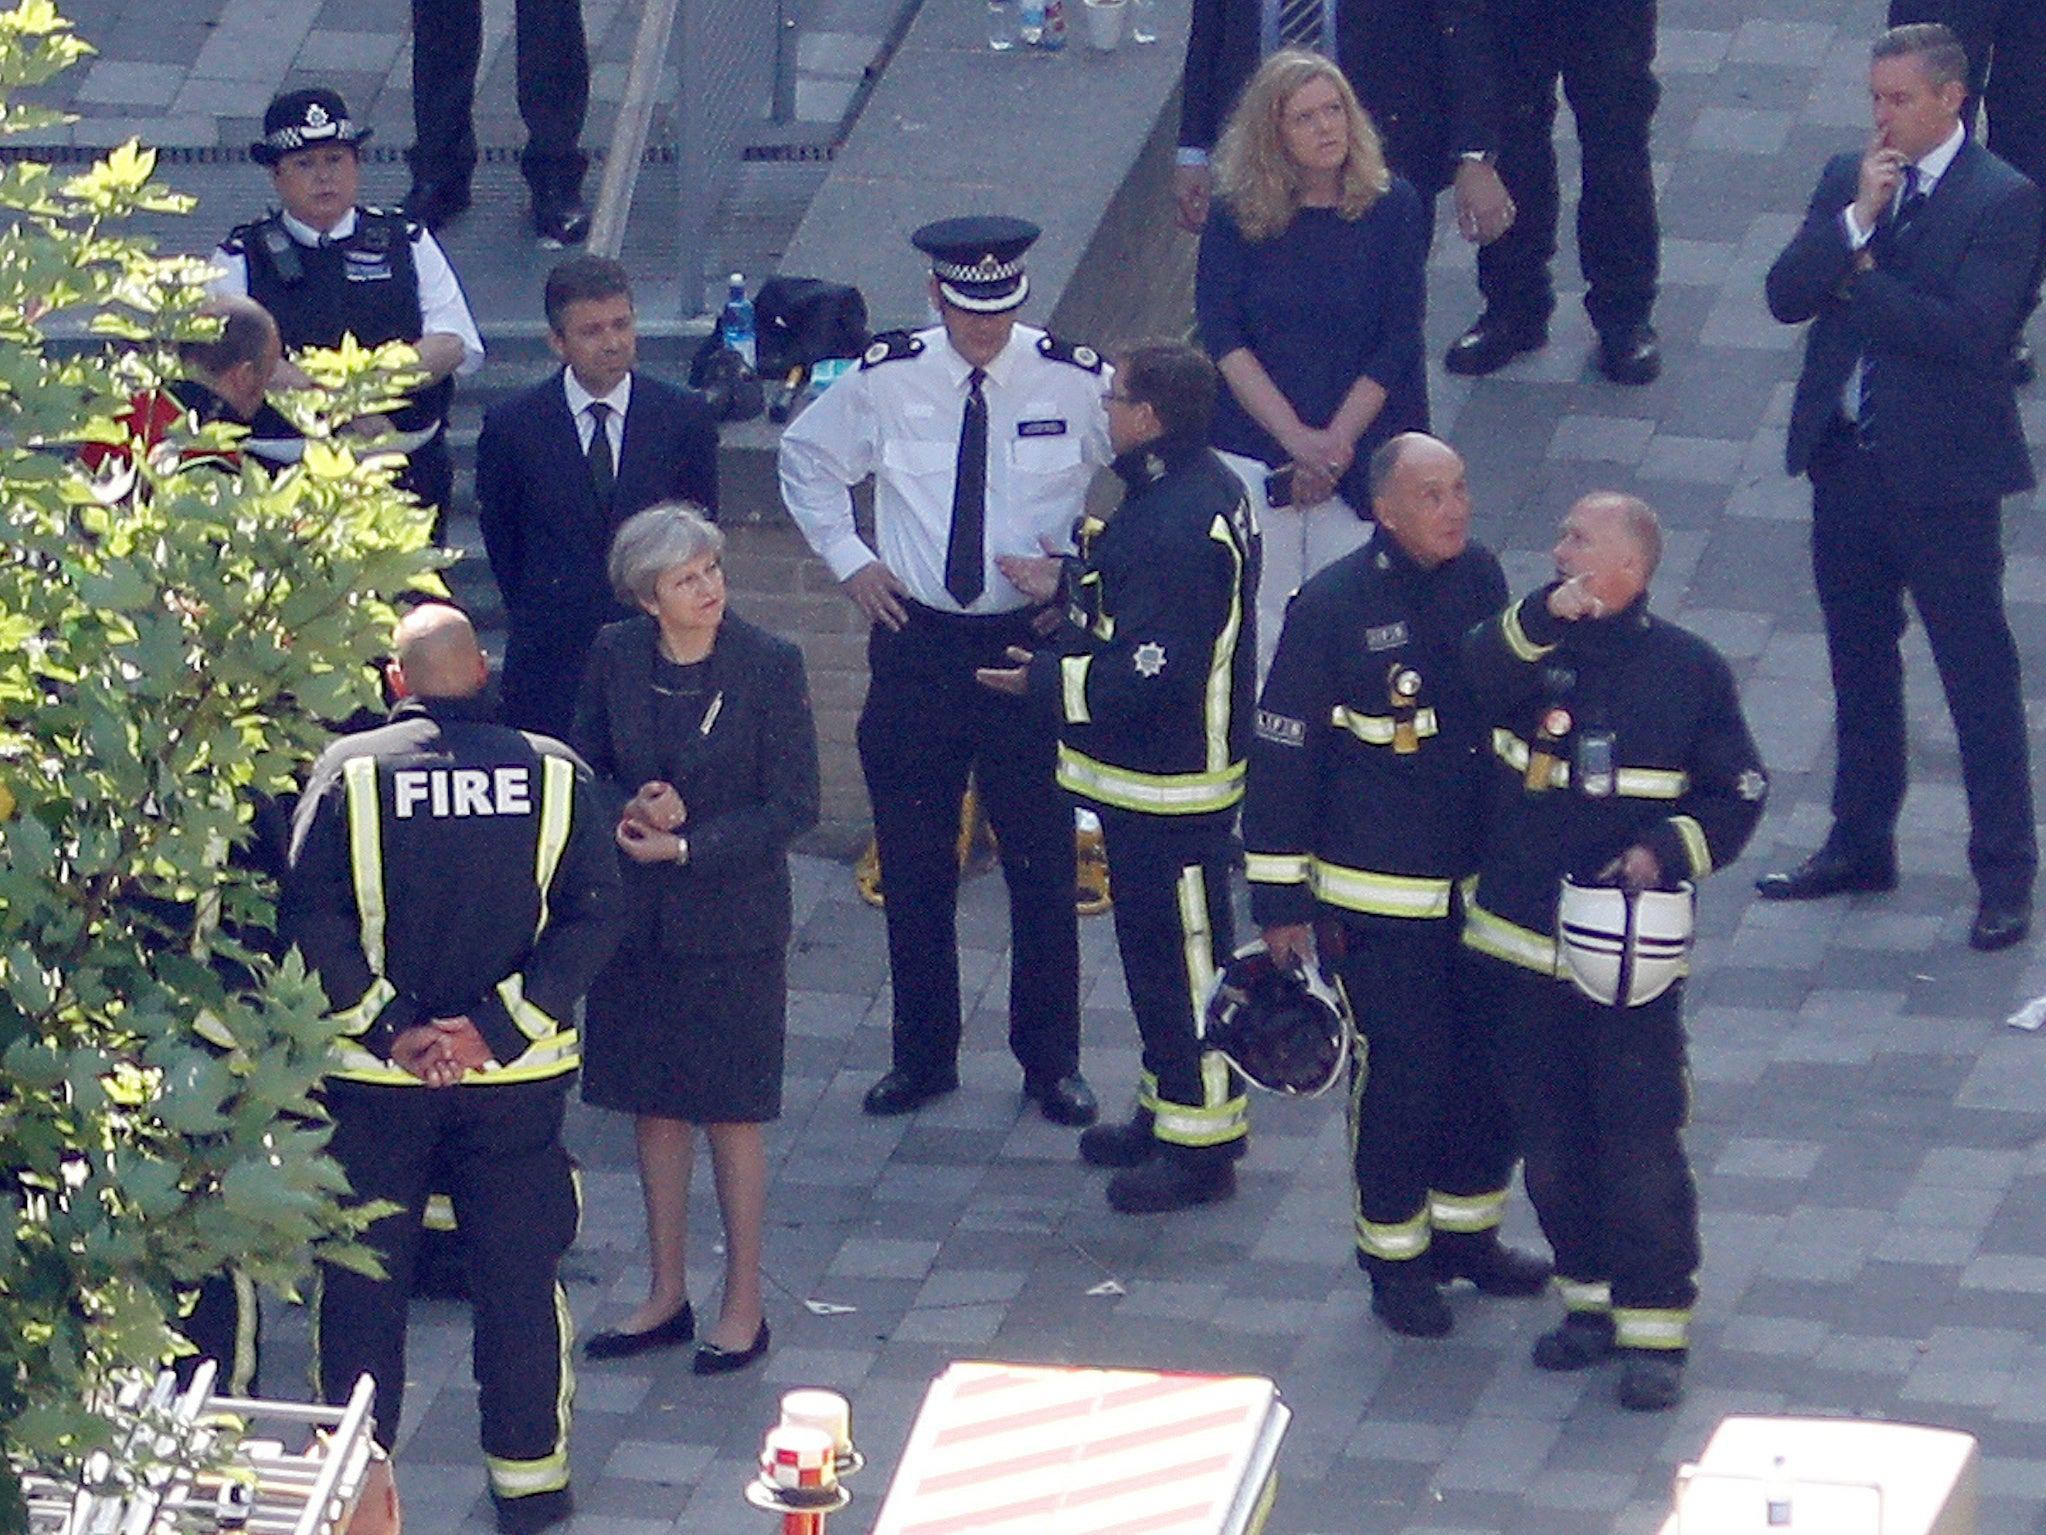 The Prime Minister visited the scene of the tower block destroyed in the fire disaster in north Kensington